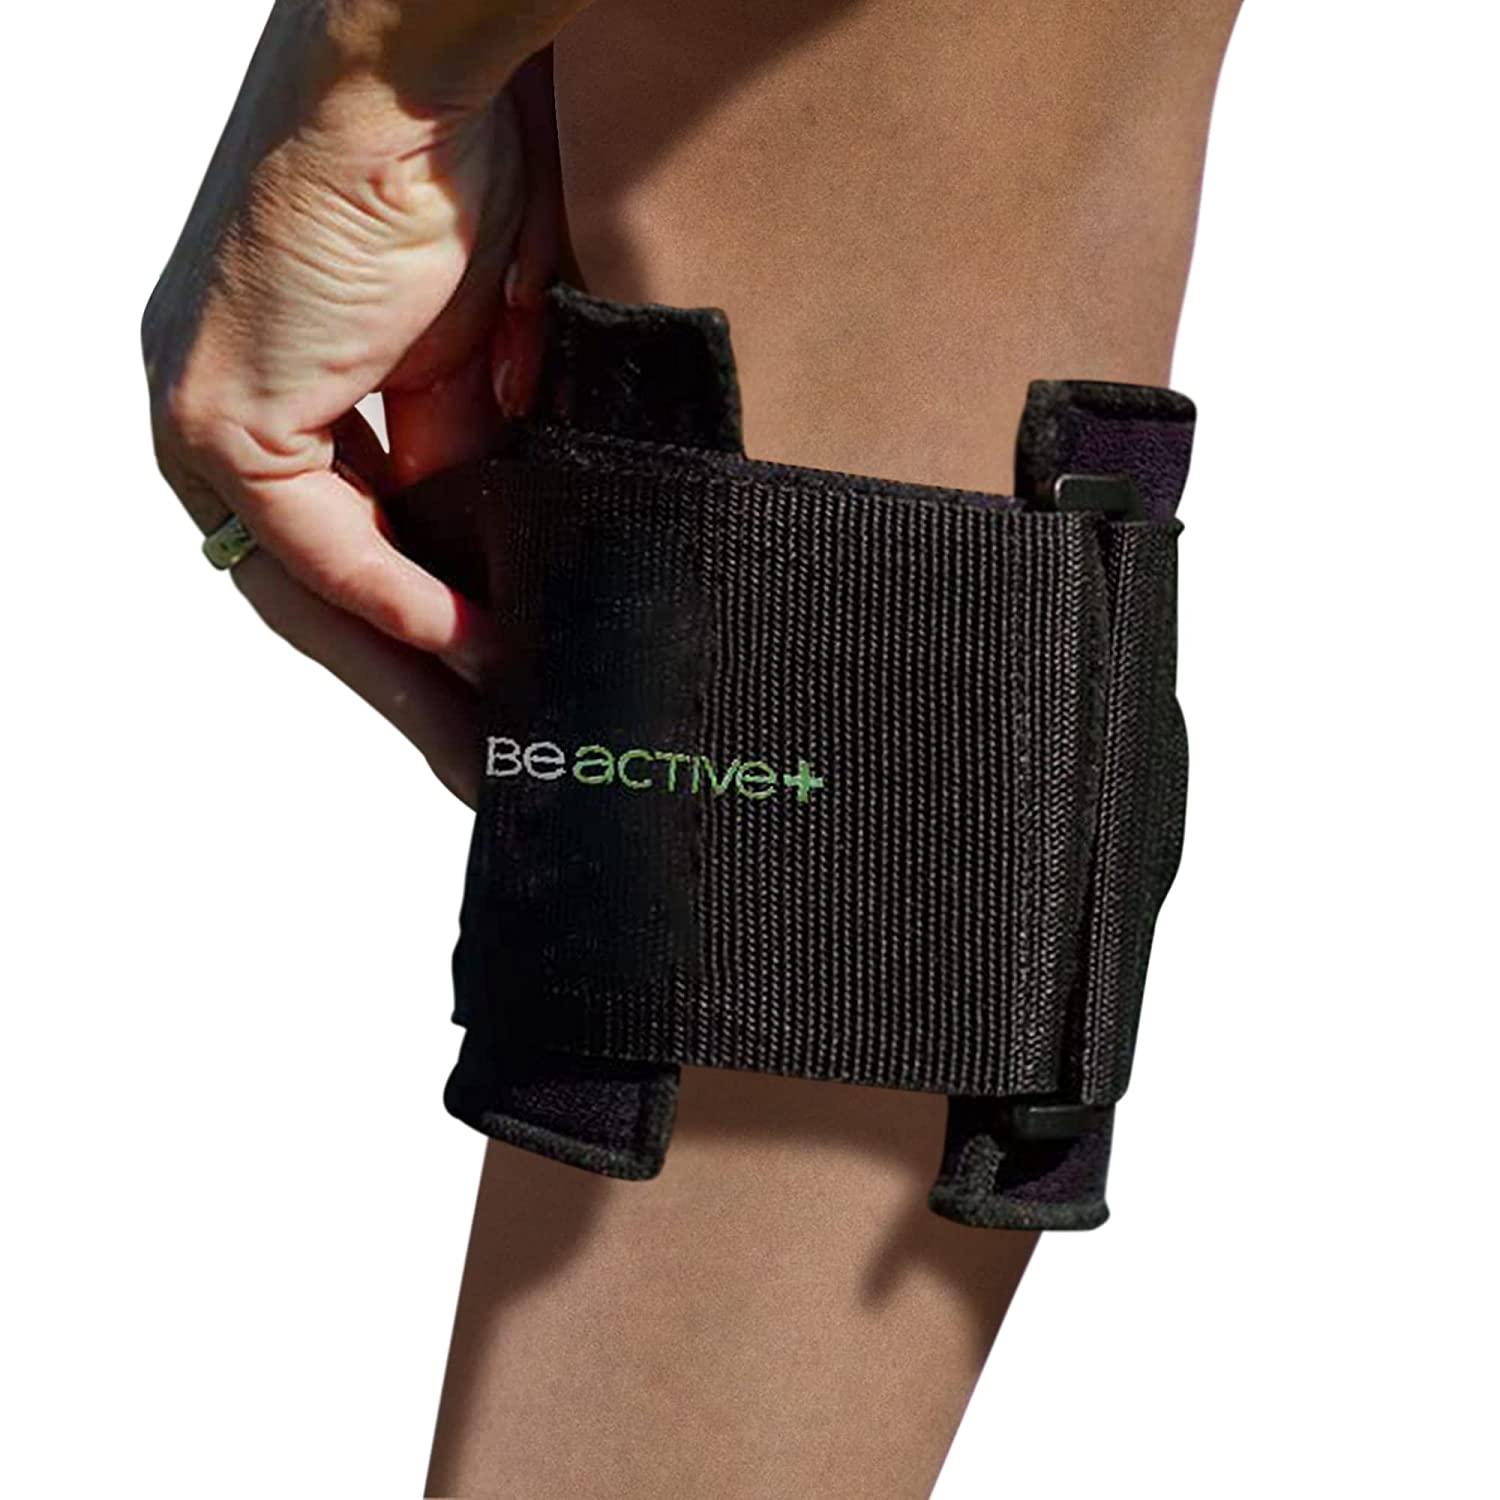 BEACTIVE Plus Acupressure System - Sciatica Pain Relief Brace For Sciatic  Nerve Pain, Lower Back, & Hip - Be Active Plus Knee Brace With Pressure Pad  Targeted Compression For Sciatica Relief - Unisex